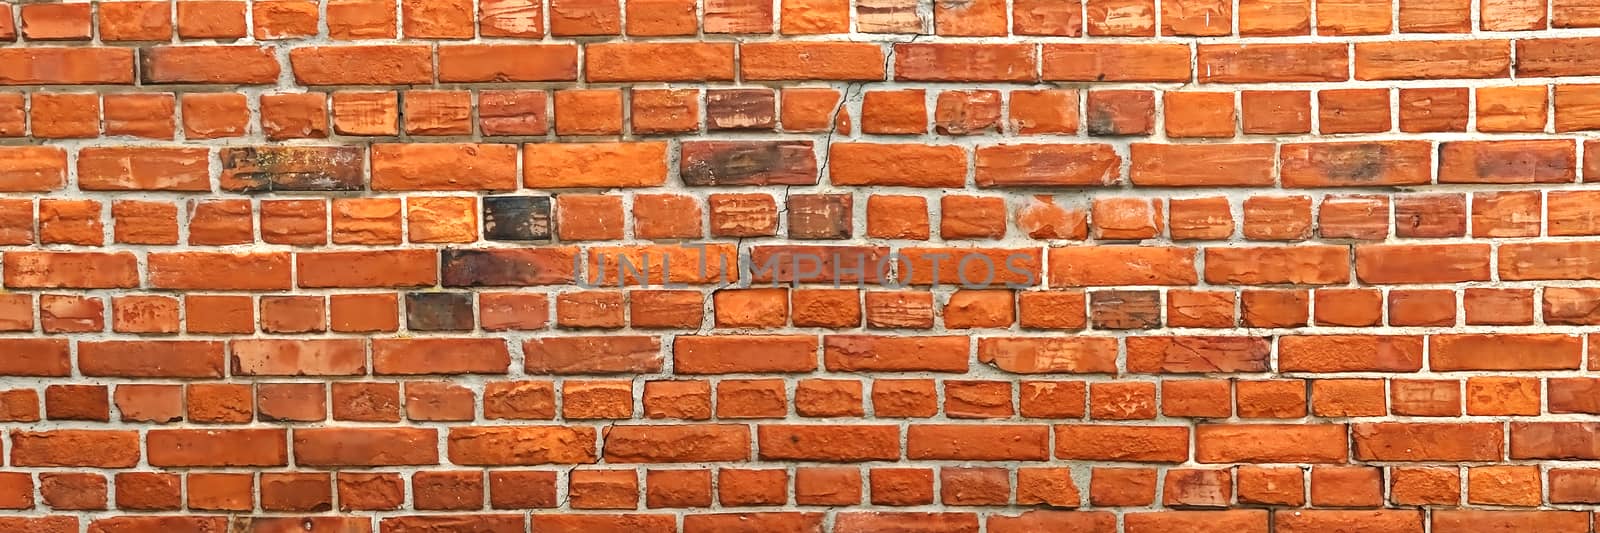 texture for background from vintage red Brick wall.